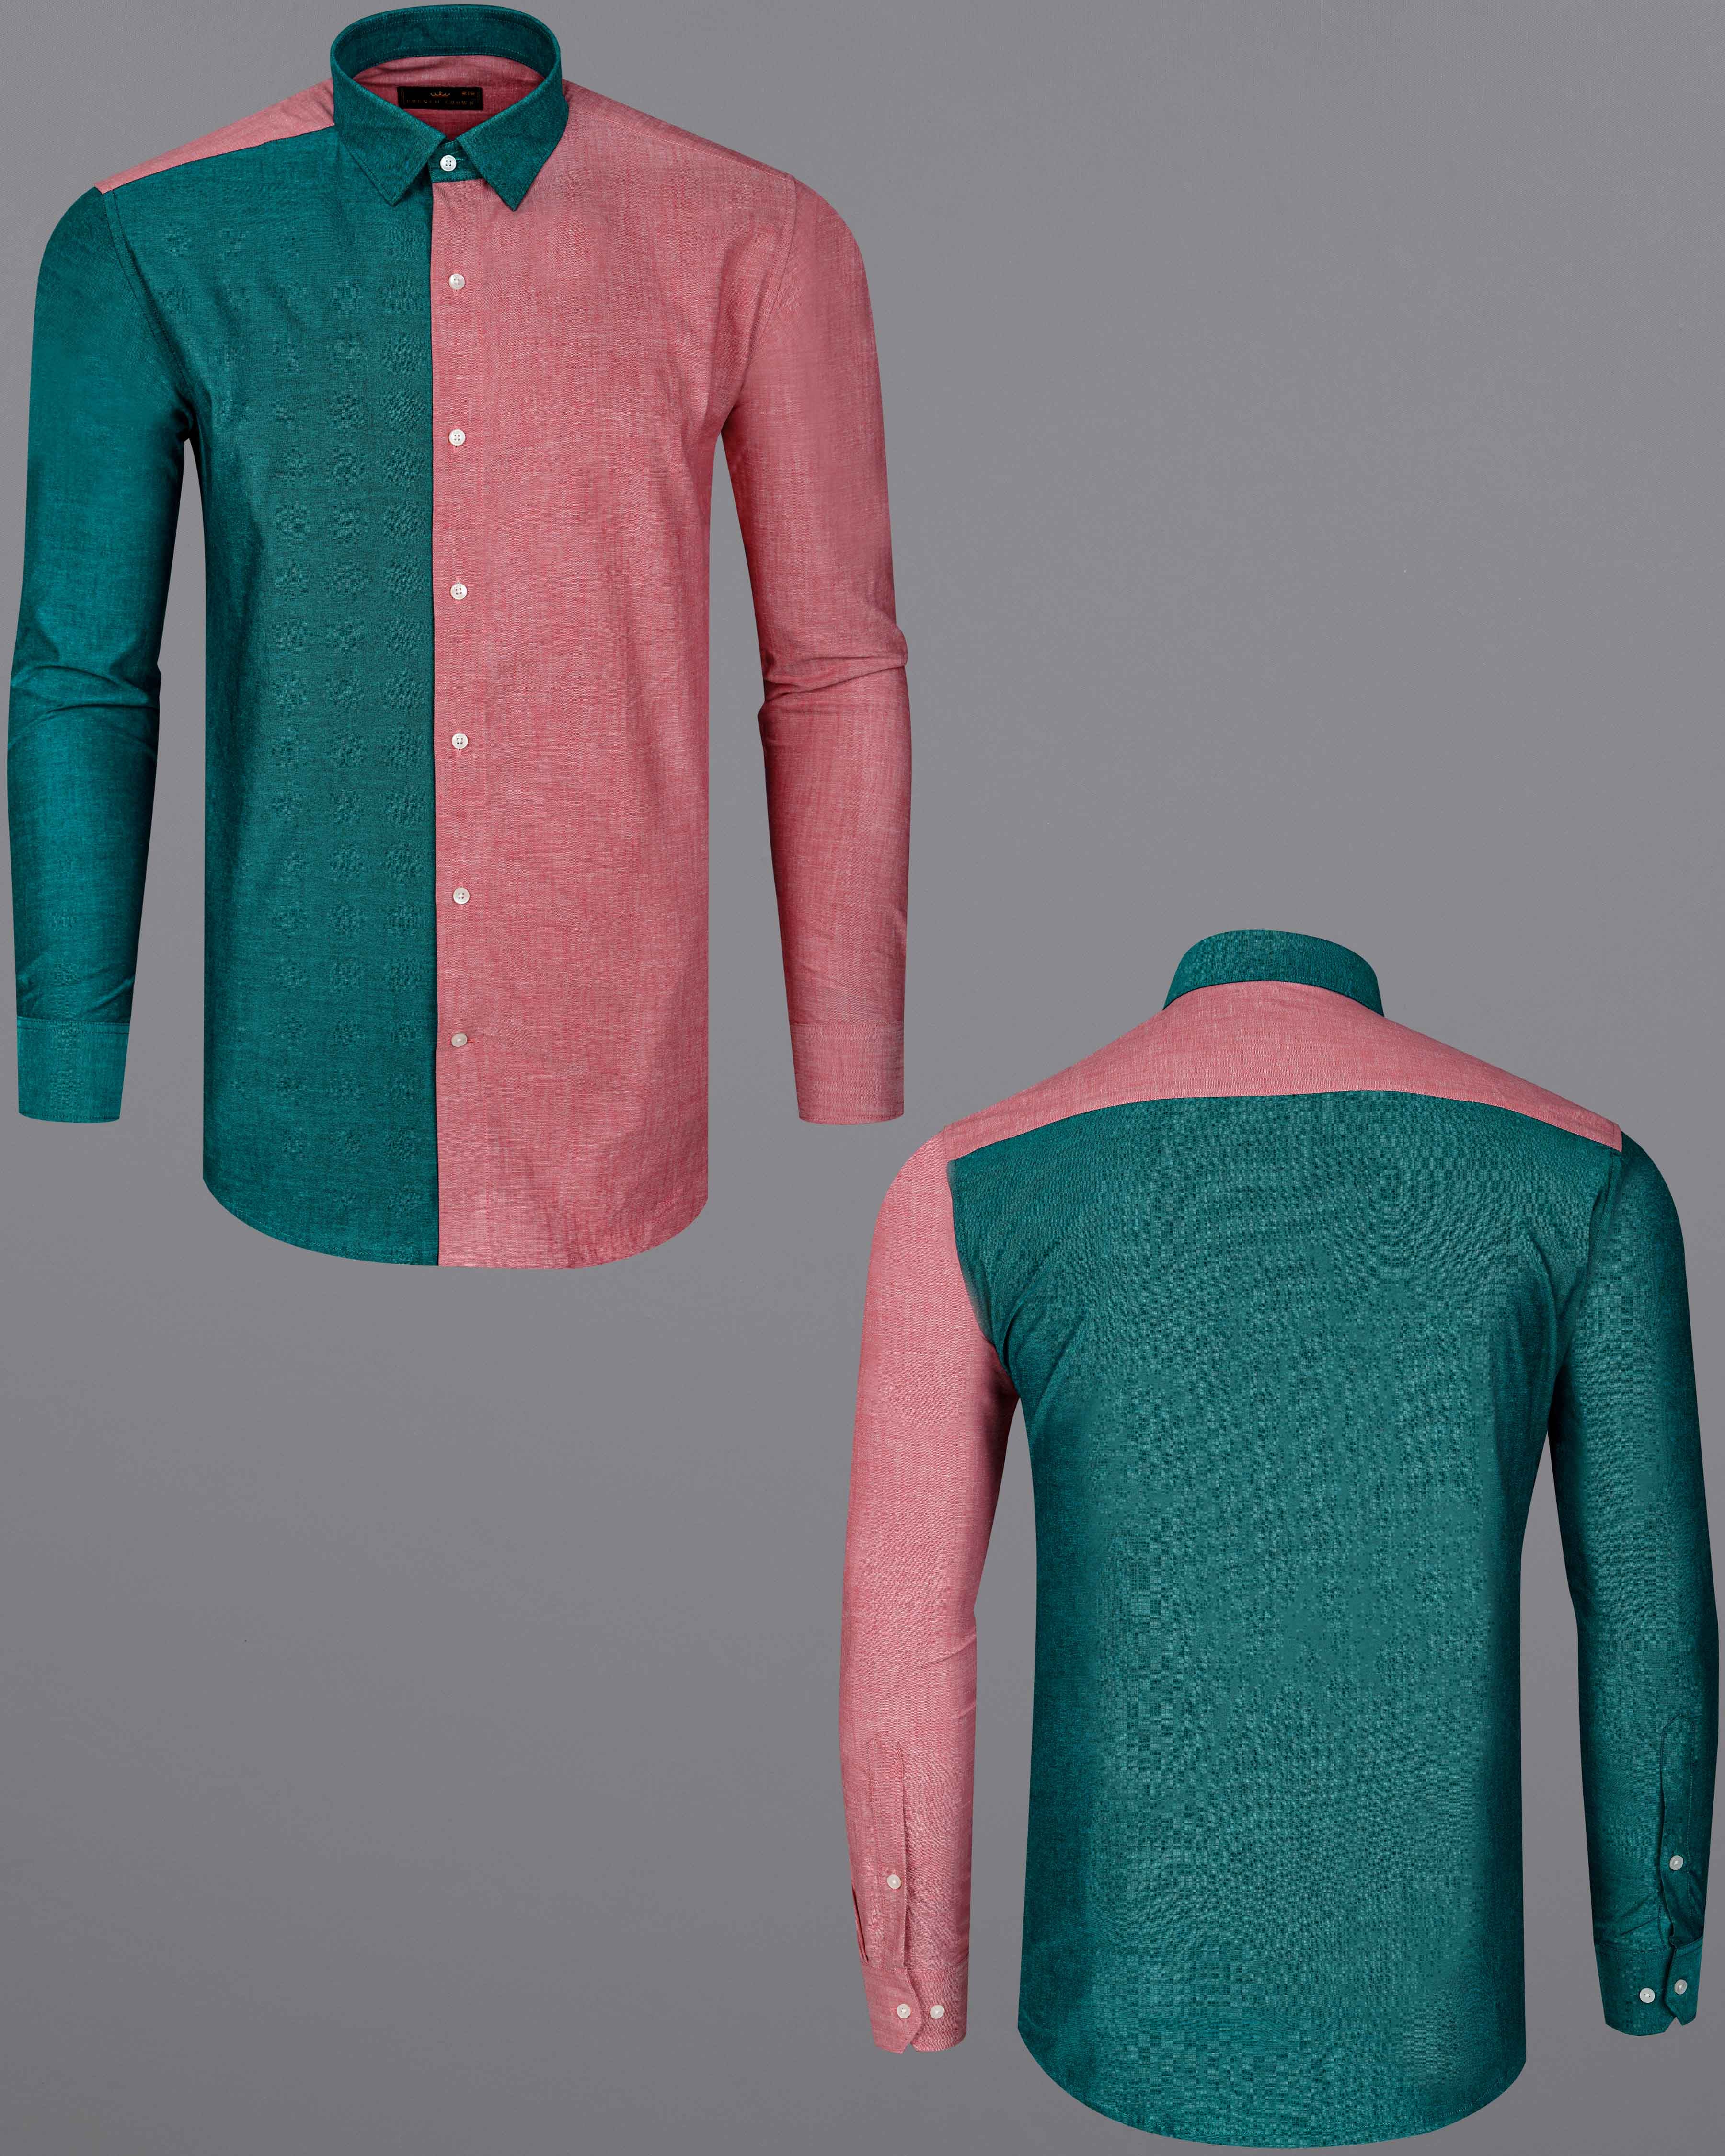 Sherpa Sea Blue and Cranberry Pink Royal Oxford Designer Shirt 8037-P190-38, 8037-P190-H-38, 8037-P190-39,8037-P190-H-39, 8037-P190-40, 8037-P190-H-40, 8037-P190-42, 8037-P190-H-42, 8037-P190-44, 8037-P190-H-44, 8037-P190-46, 8037-P190-H-46, 8037-P190-48, 8037-P190-H-48, 8037-P190-50, 8037-P190-H-50, 8037-P190-52, 8037-P190-H-52